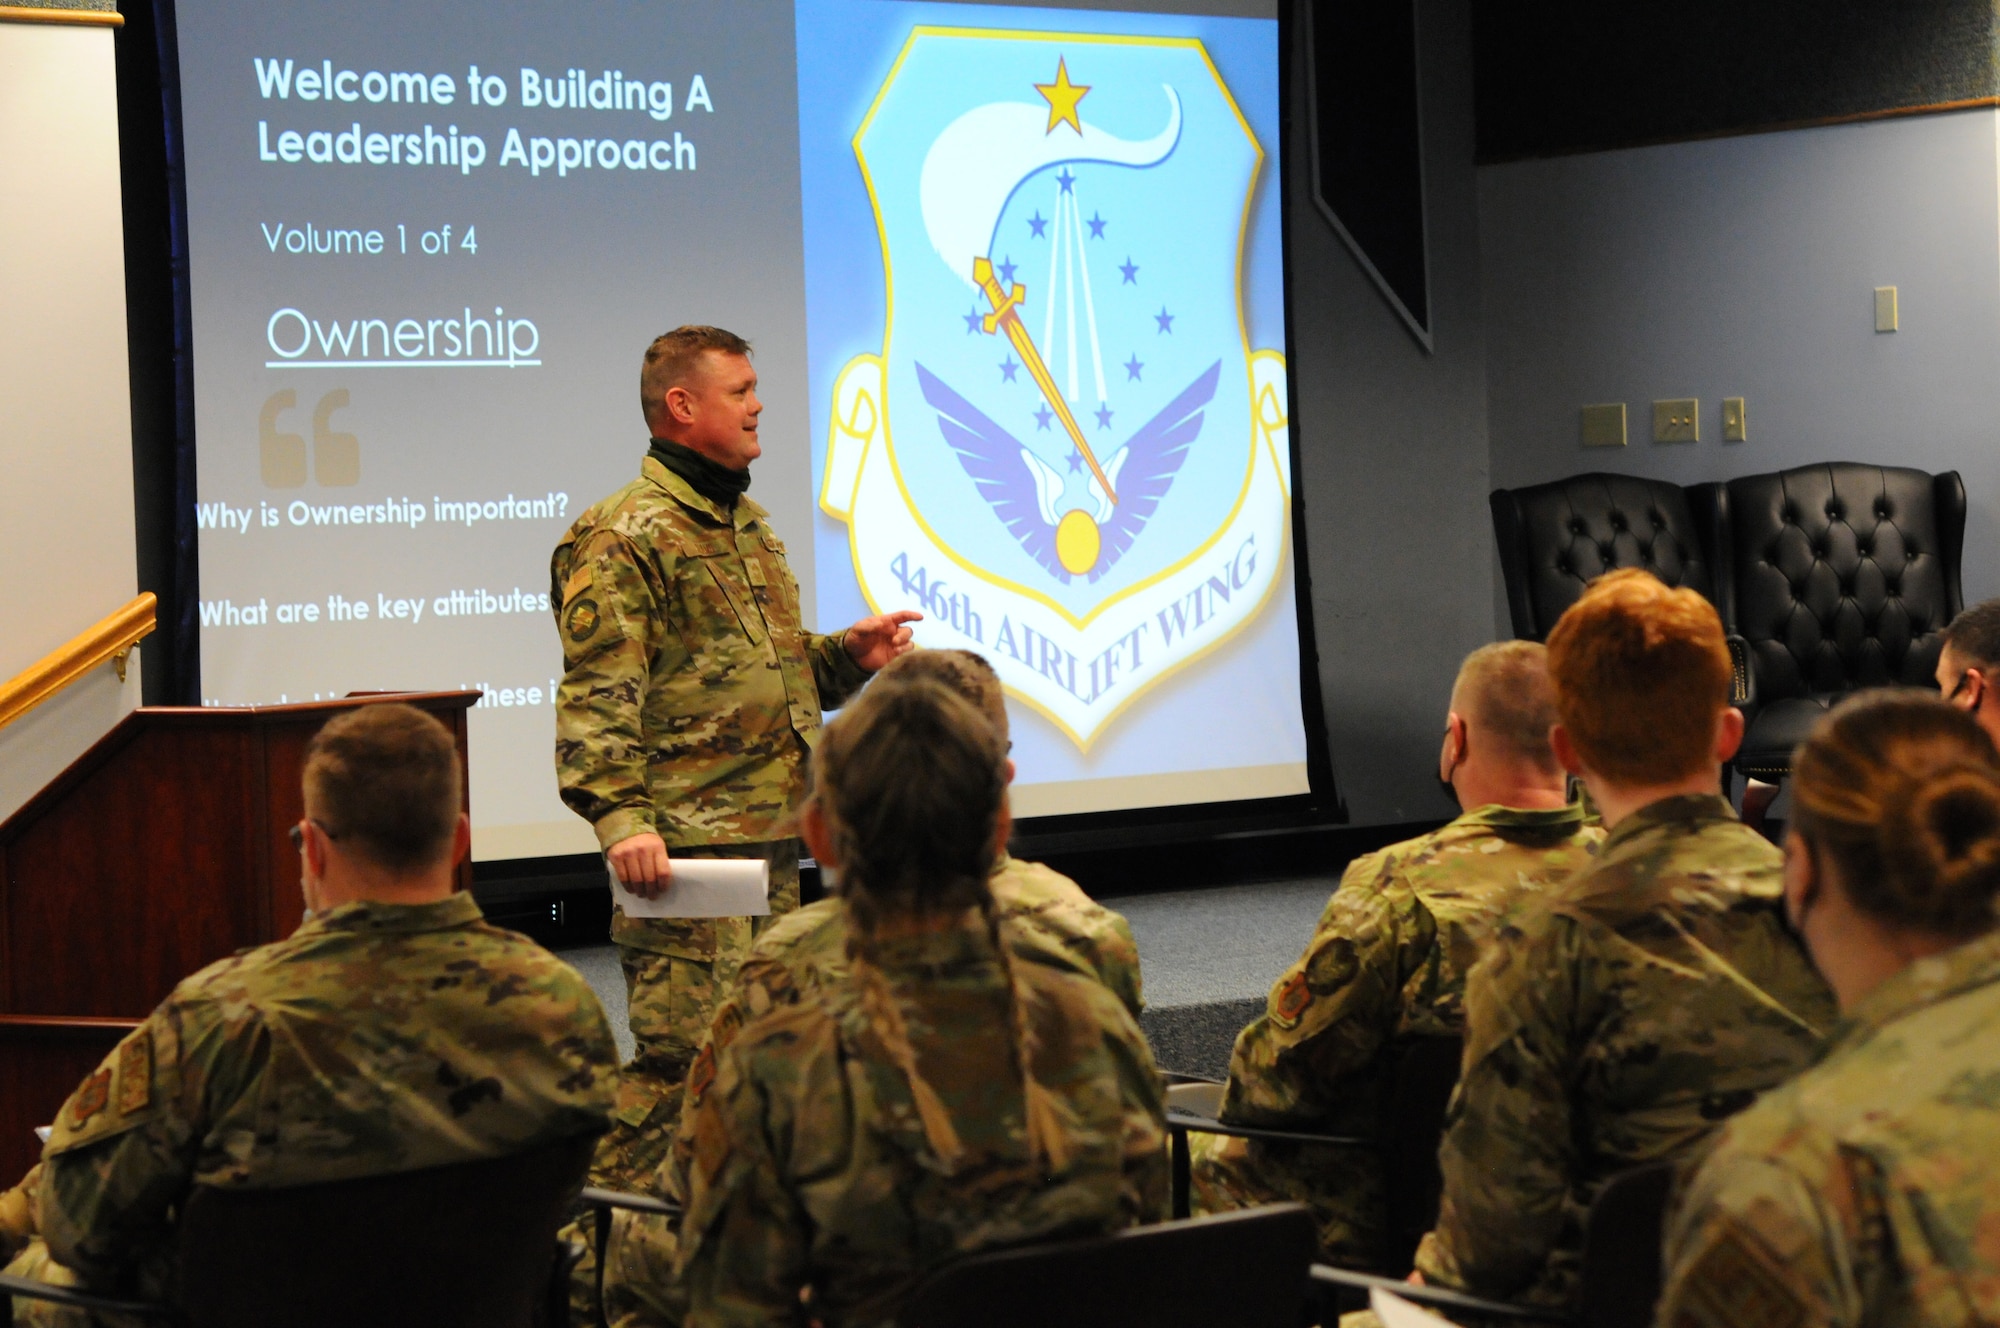 Airman talks to group of Airman about leadership